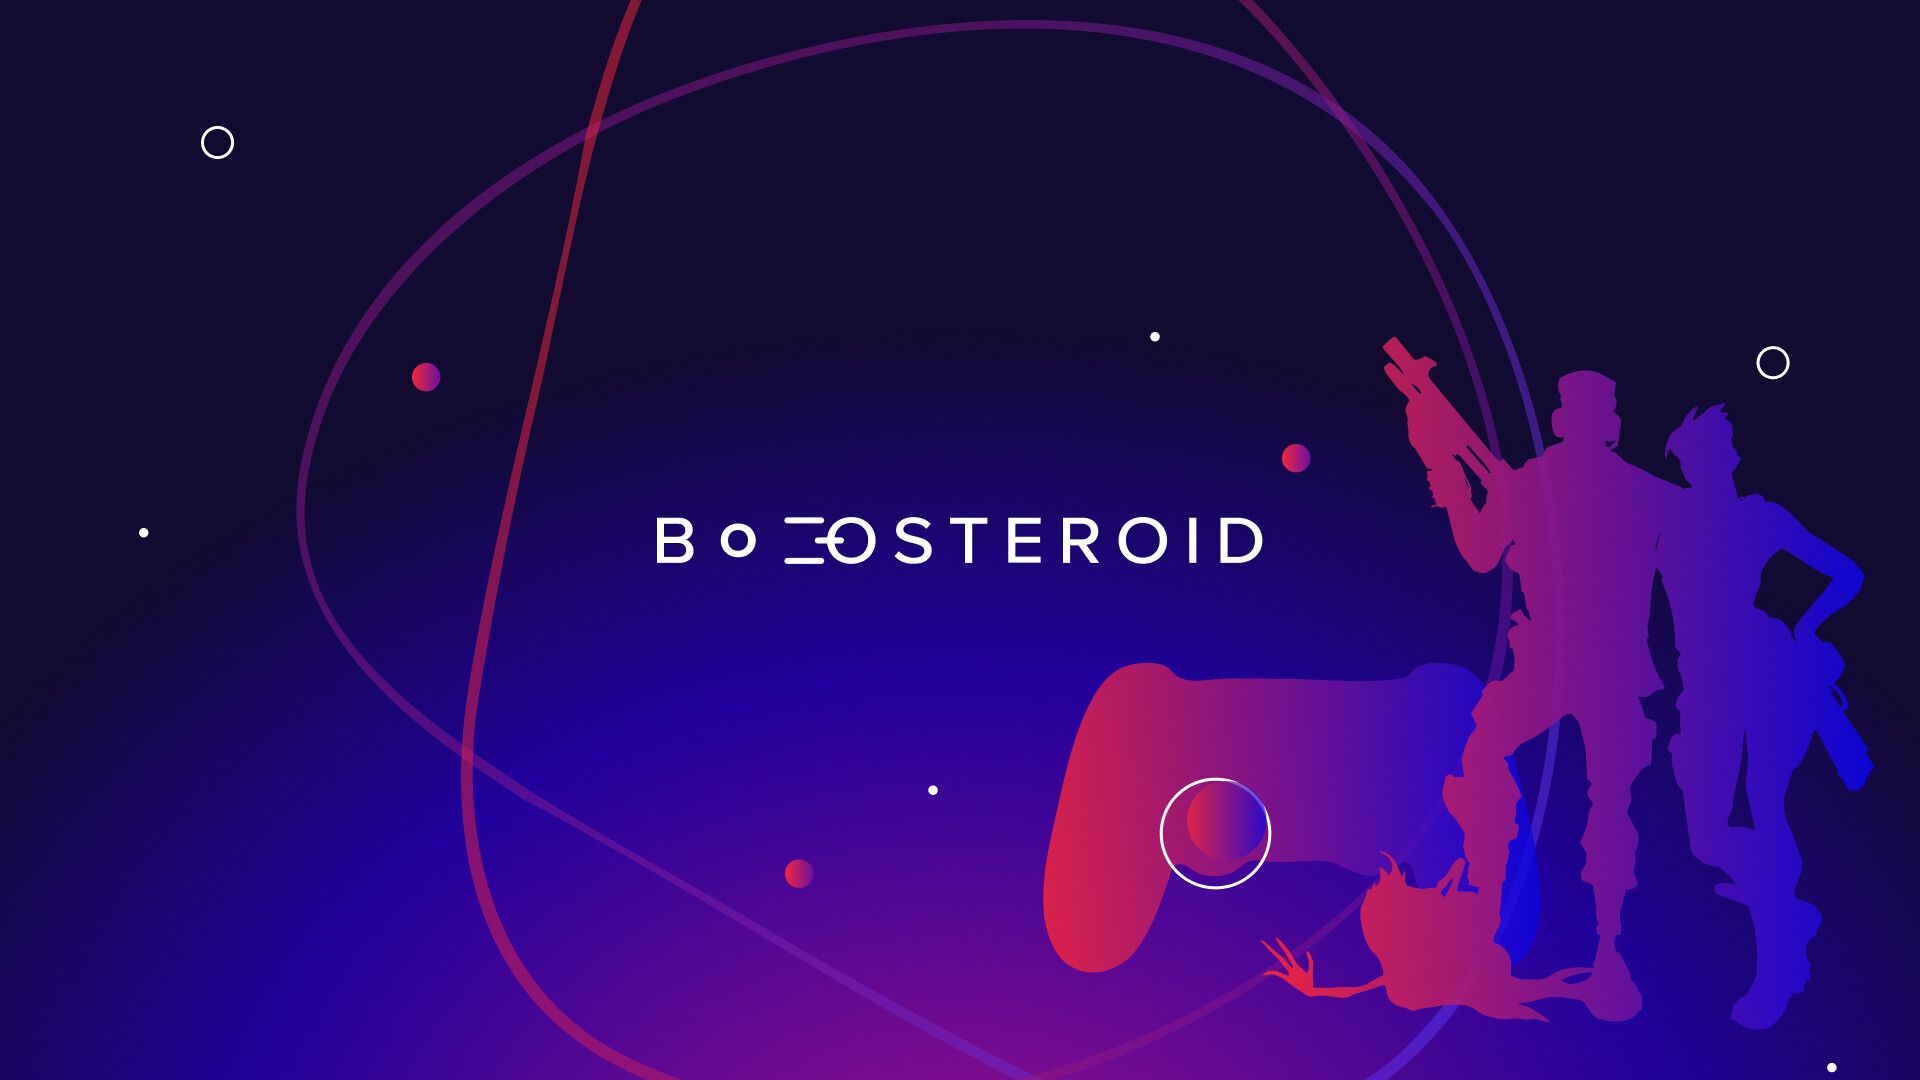 Bandwidth: Boosteroid lands in the US, and Xbox expands even further